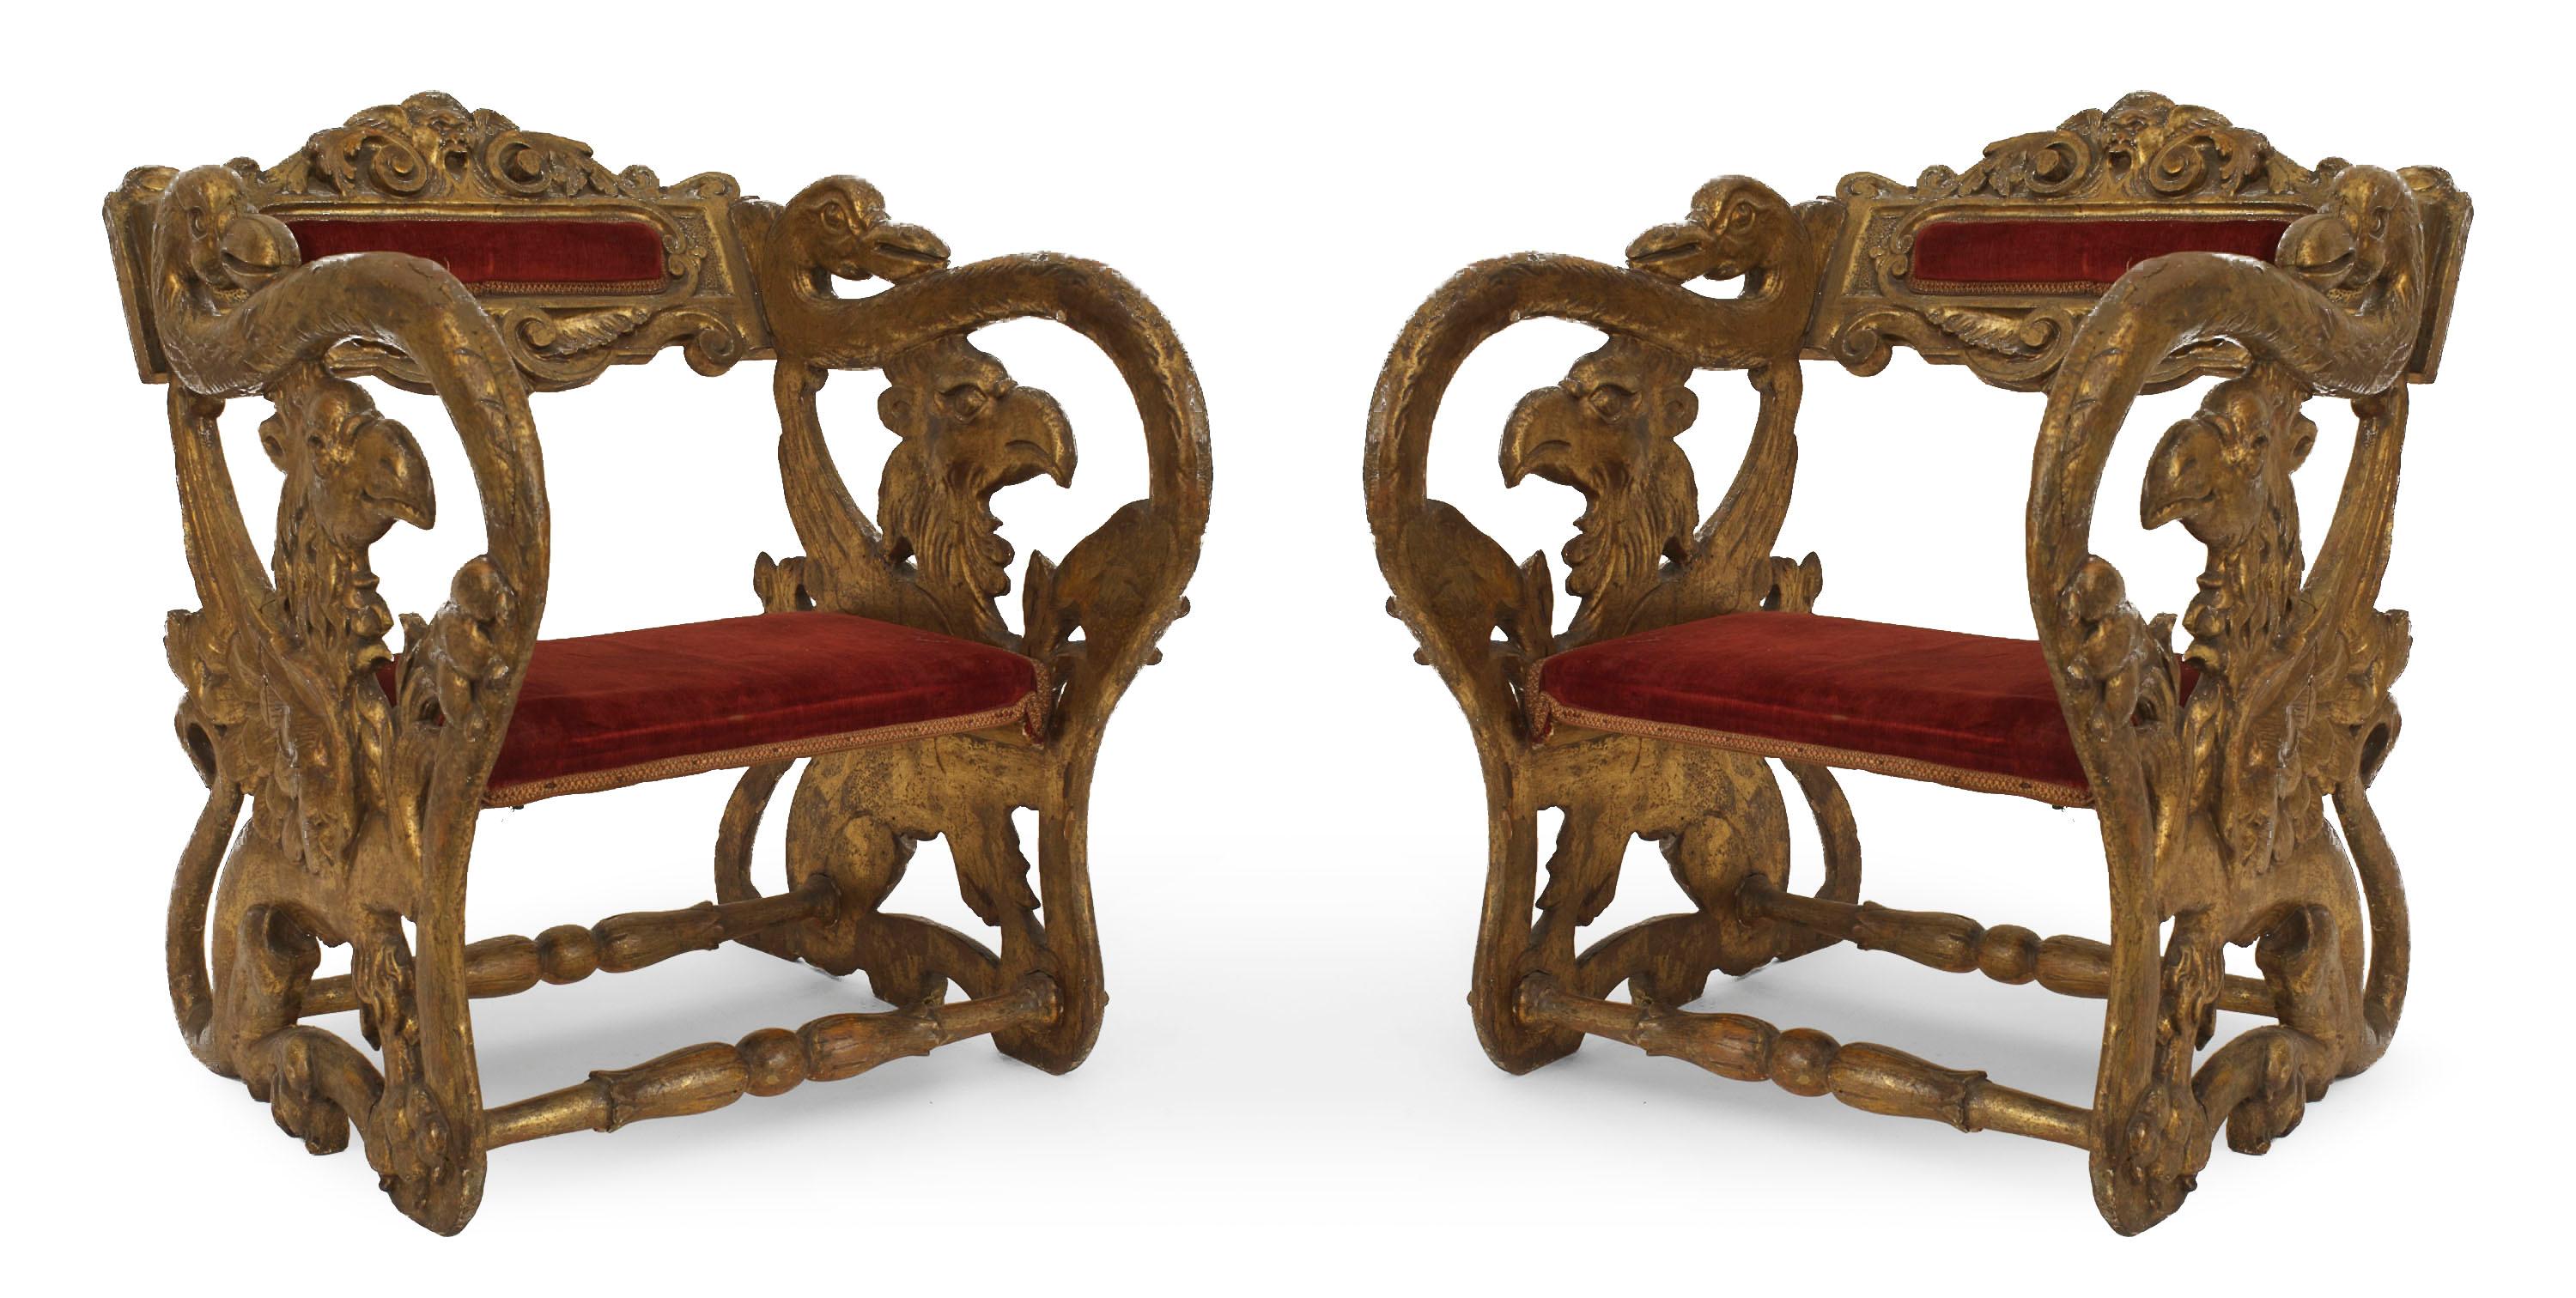 Pairs of Italian Renaissance style gilt jester armchairs with swan arms, eagle sides, and red upholstered seats and backs.

Priced per pair, additional pair available.